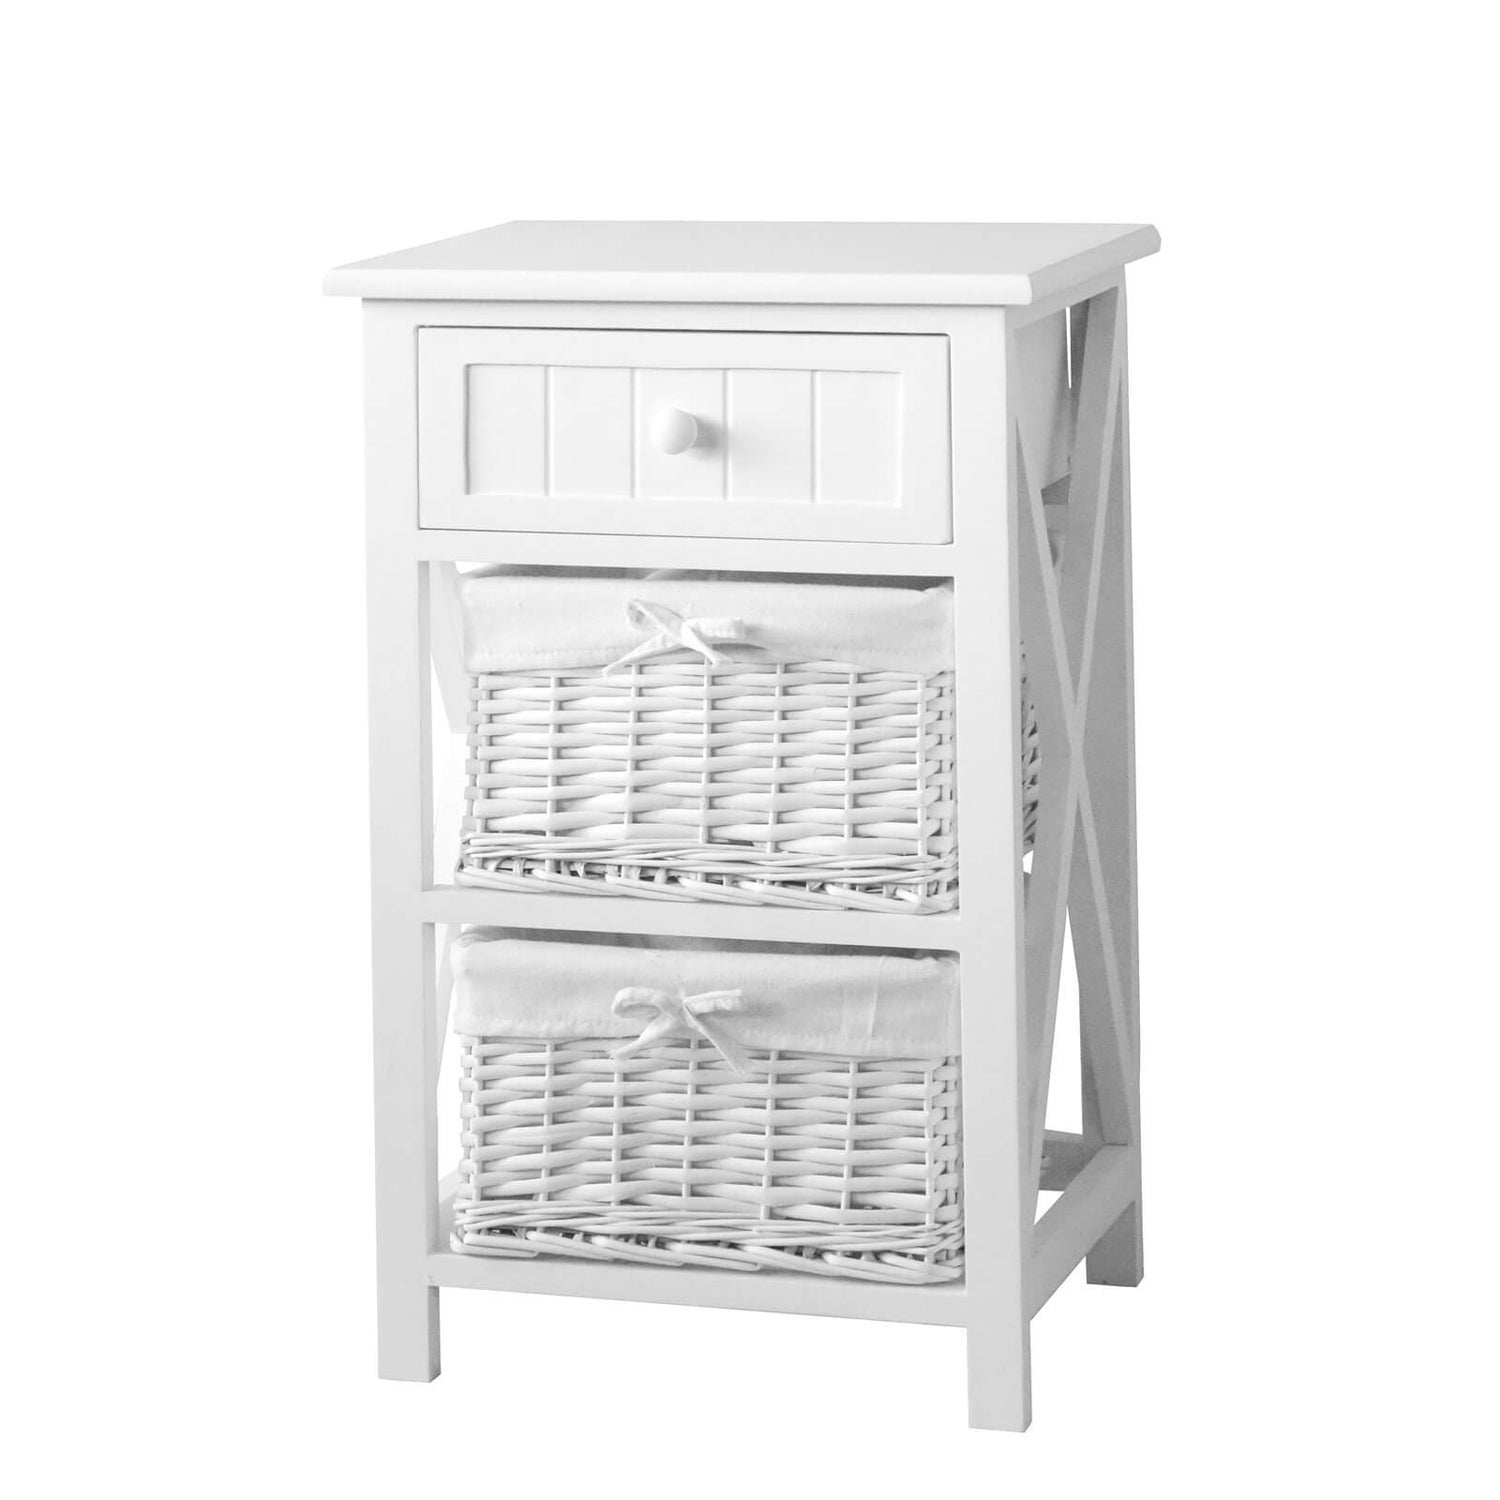 Willow Basket Storage Unit, White Shelving Unit With Wicker Baskets